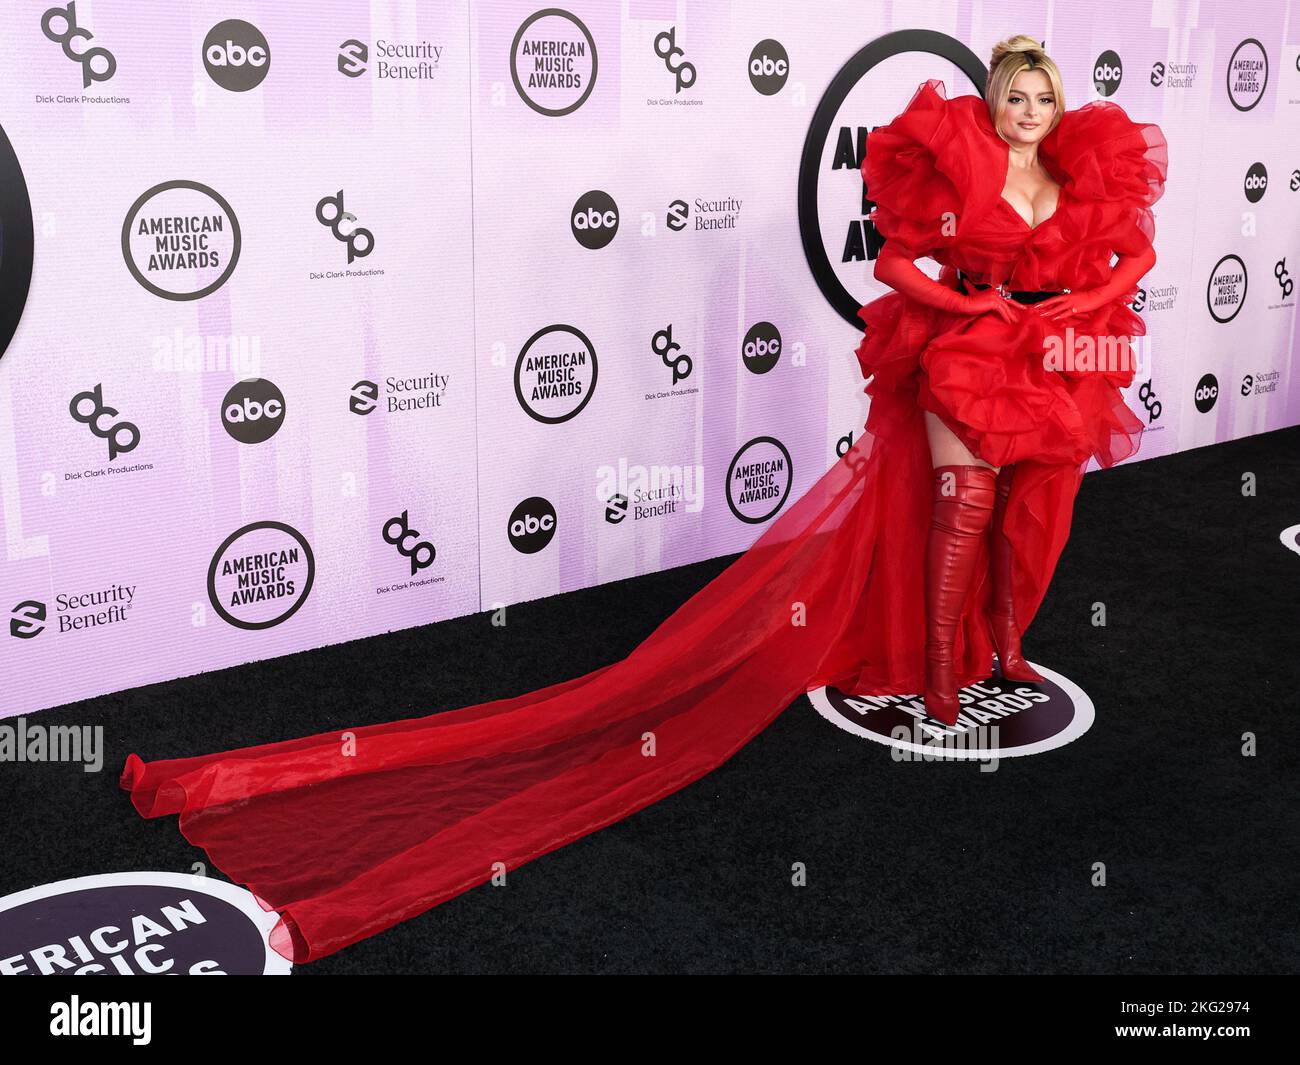 LOS ANGELES, CALIFORNIA, USA - NOVEMBER 20: Bebe Rexha (Bleta Rexha) wearing a Buerlangma dress and gloves by Atelier Biser arrives at the 2022 American Music Awards (50th Annual American Music Awards) held at Microsoft Theater at L.A. Live on November 20, 2022 in Los Angeles, California, United States. (Photo by Xavier Collin/Image Press Agency) Stock Photo